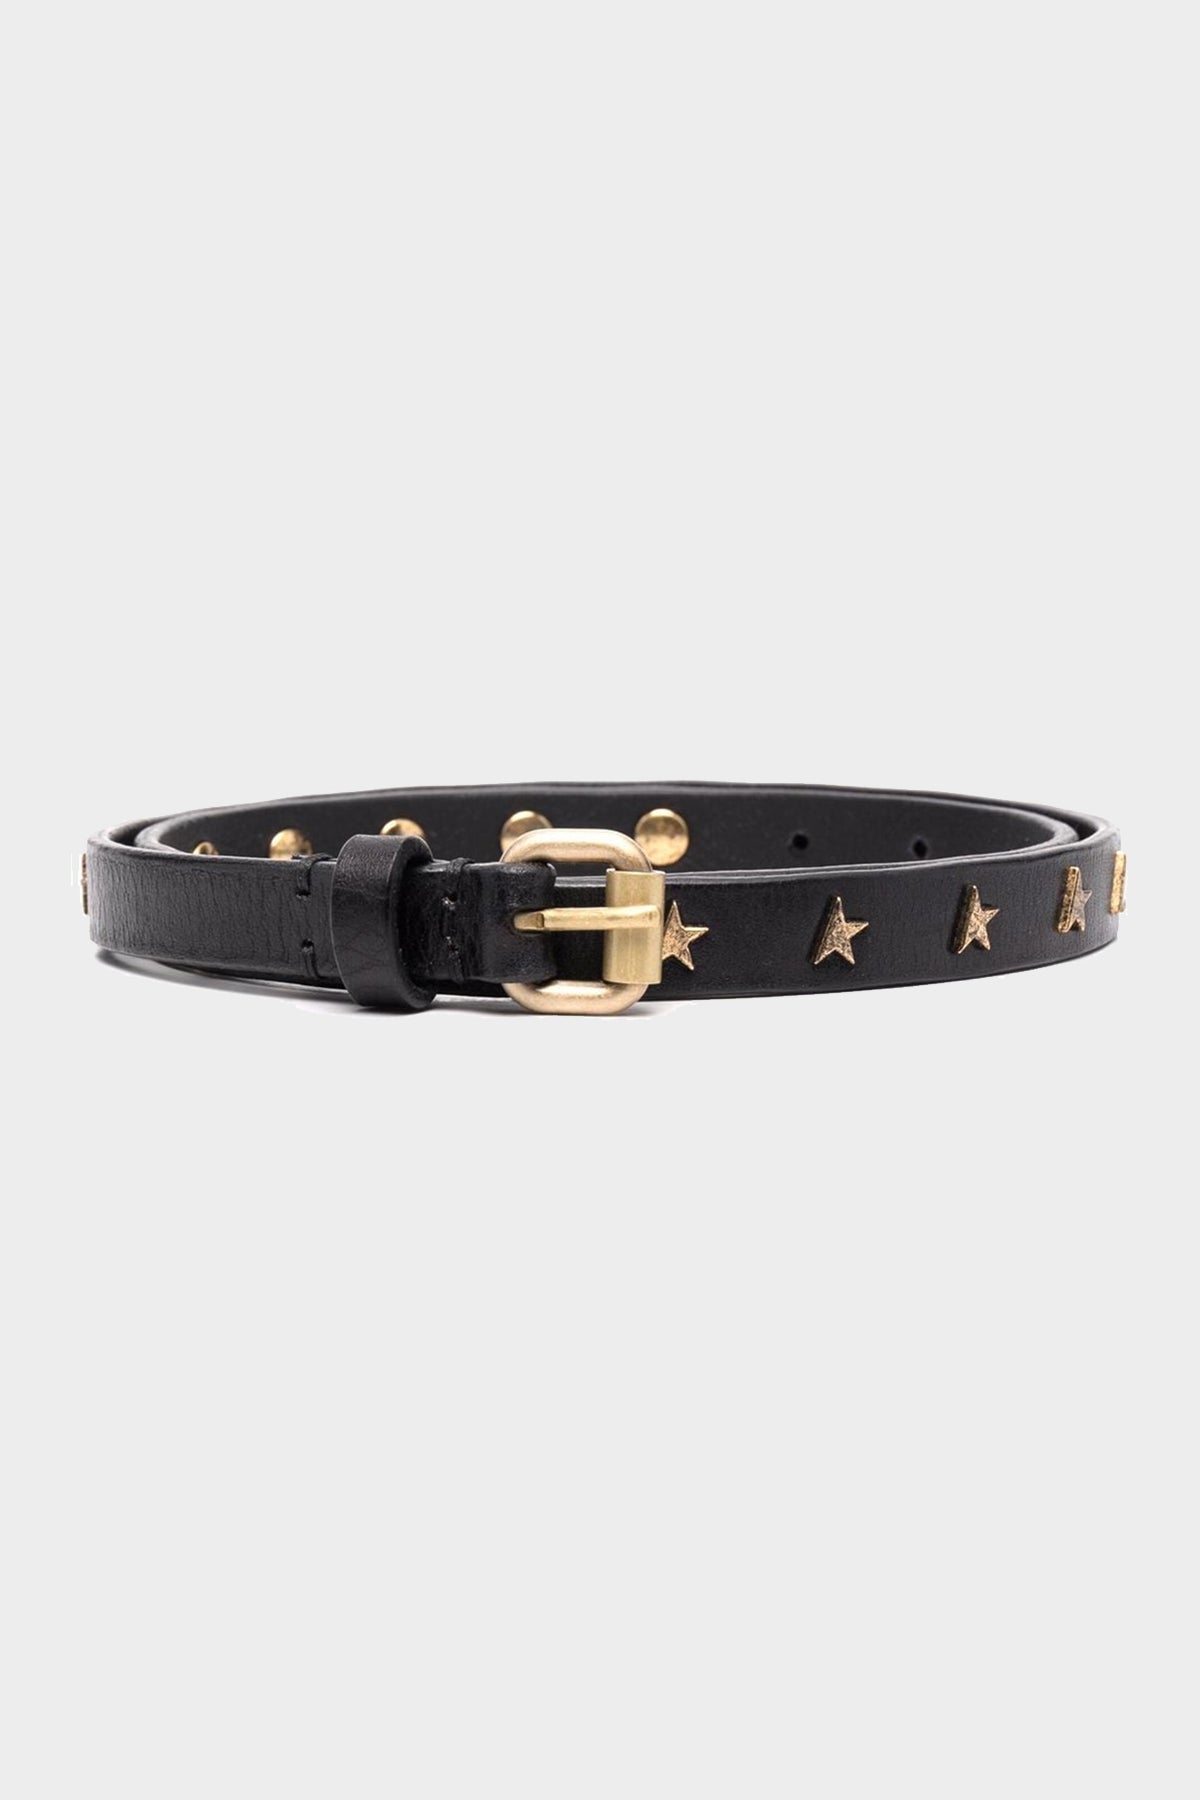 Molly Black Leather Belt with Star-Shaped Studs - shop-olivia.com